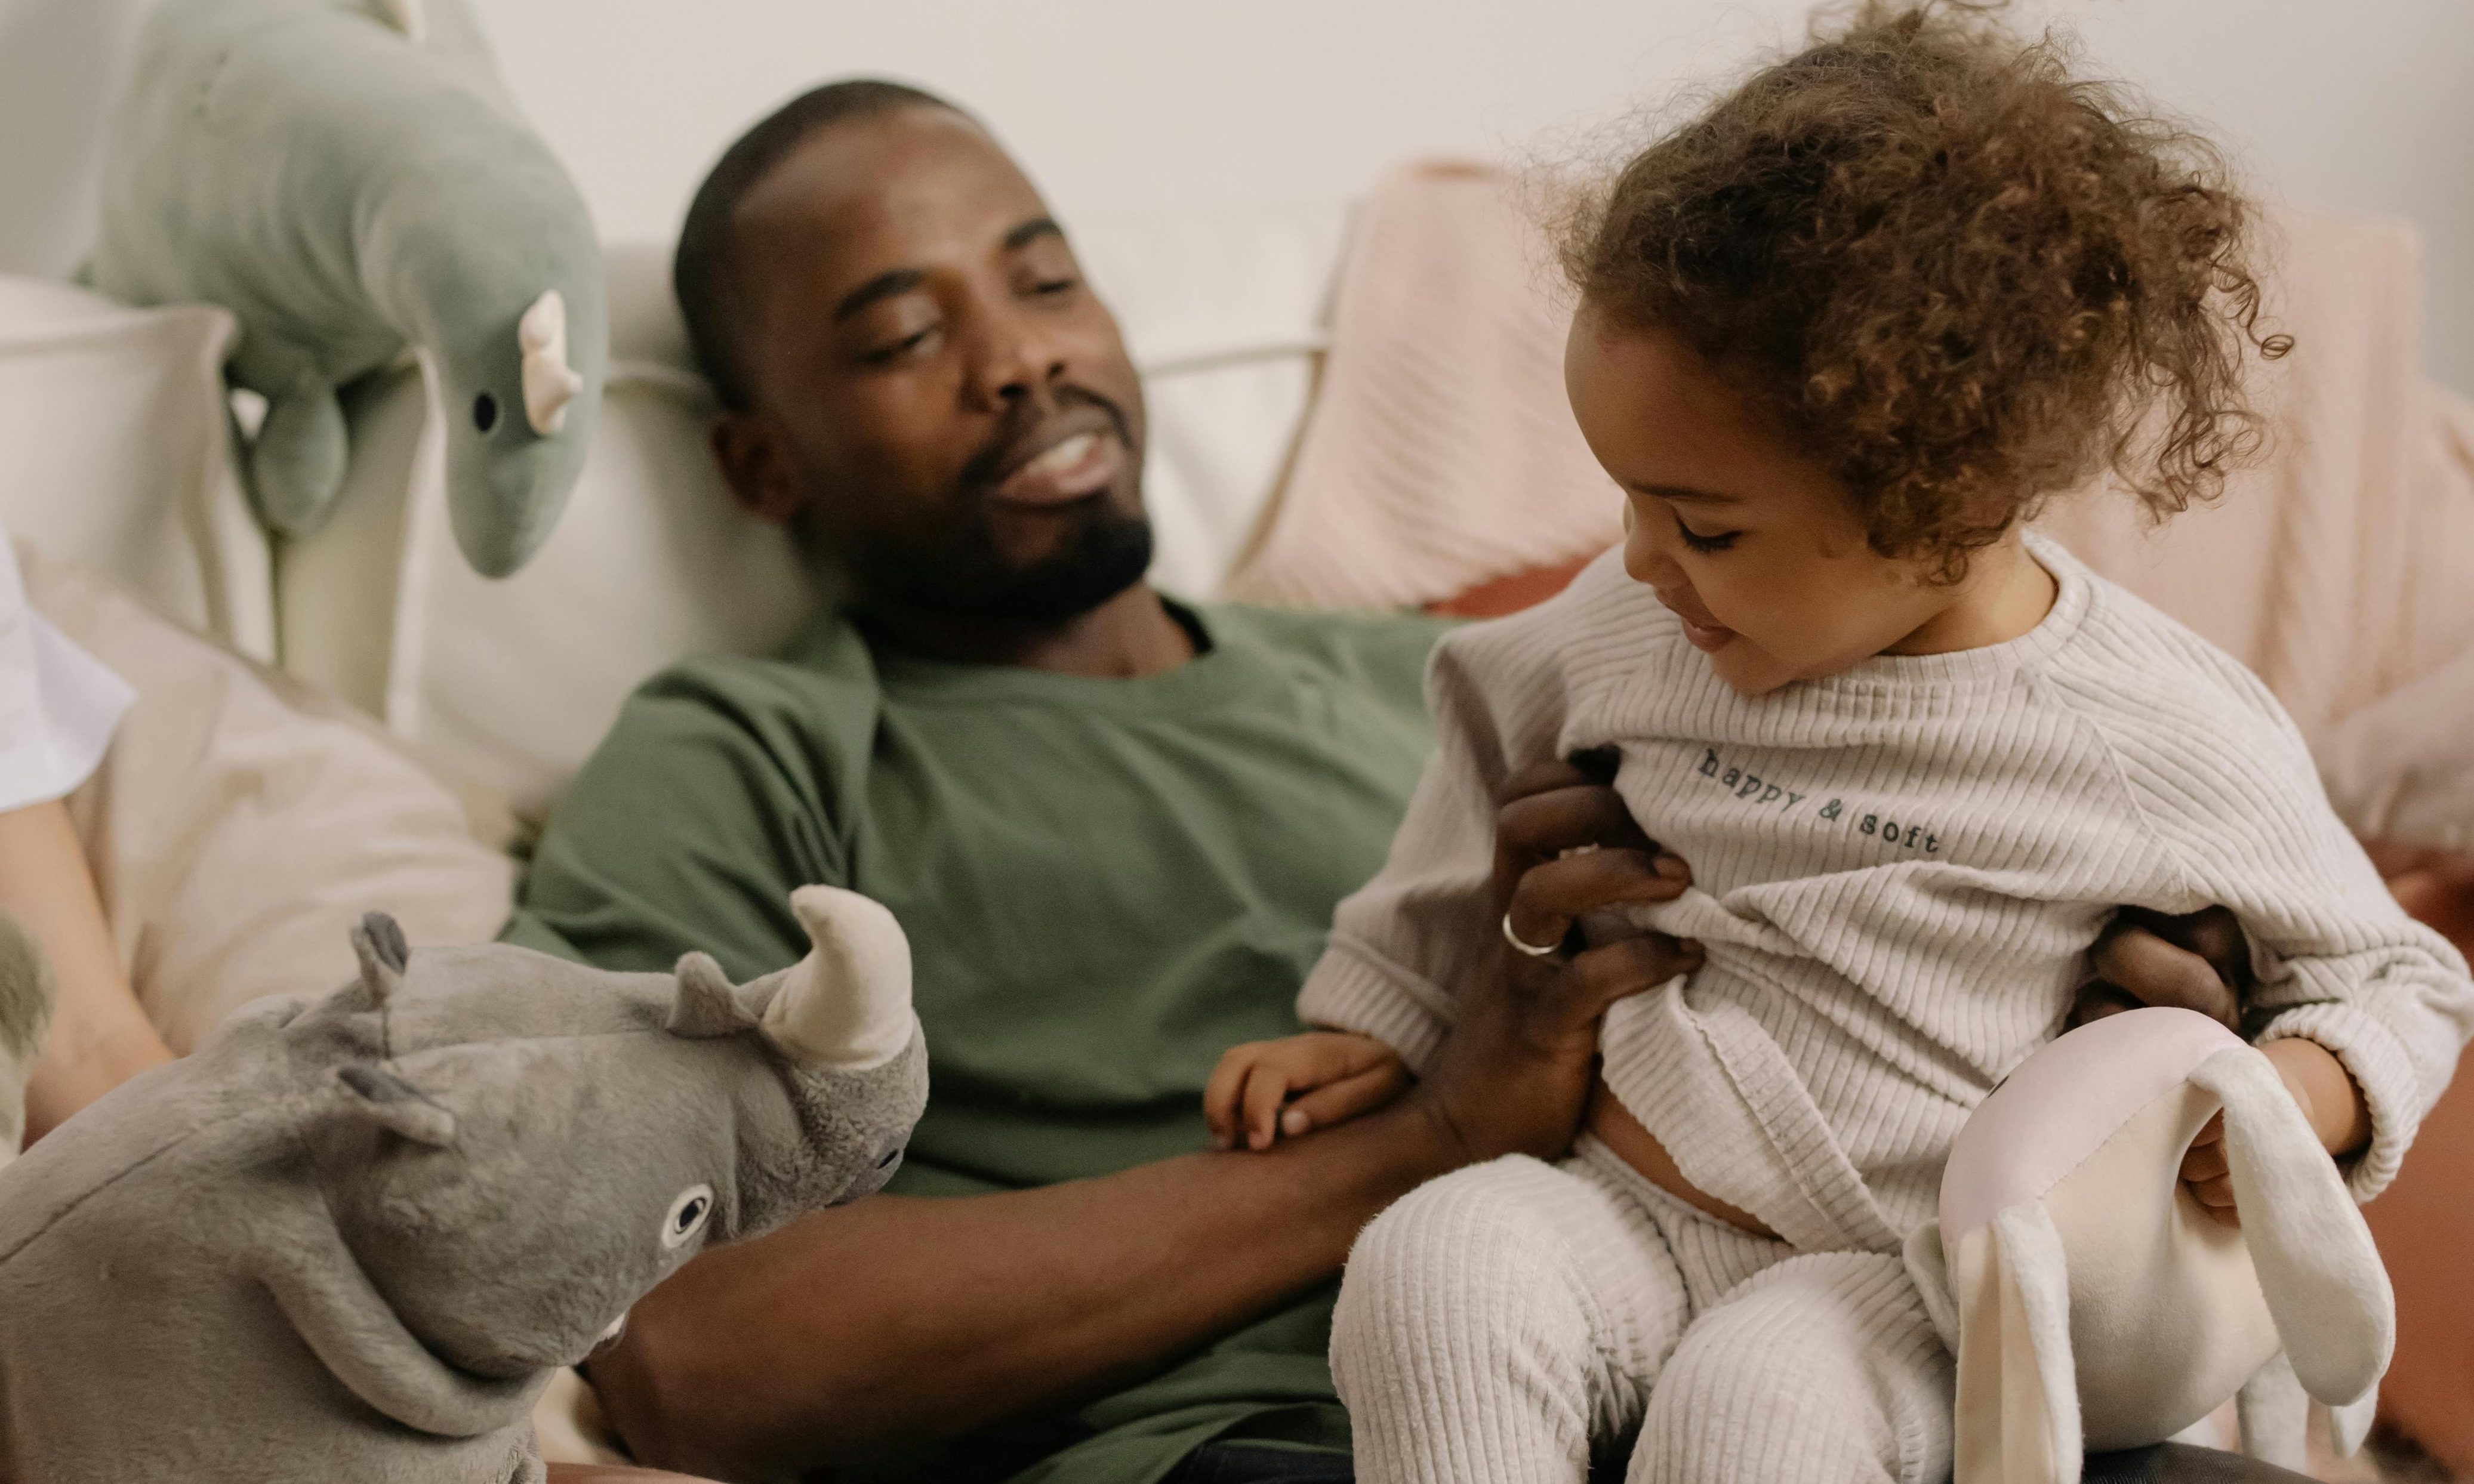 A man with a child on his lap | Source: Pexels